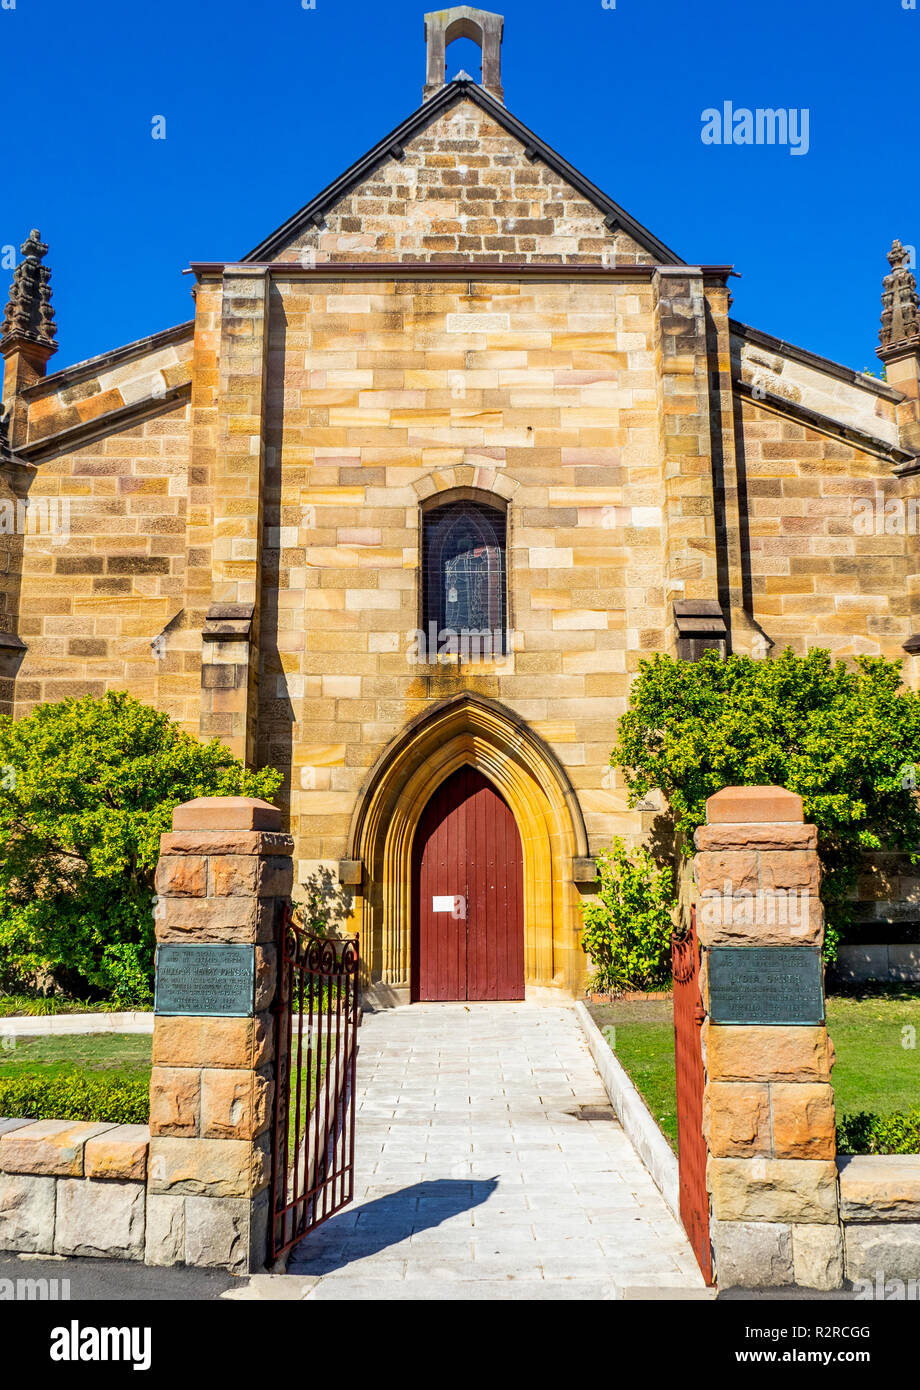 Holy Trinity Anglican Church Millers Point Sydney NSW Australia. Stock Photo